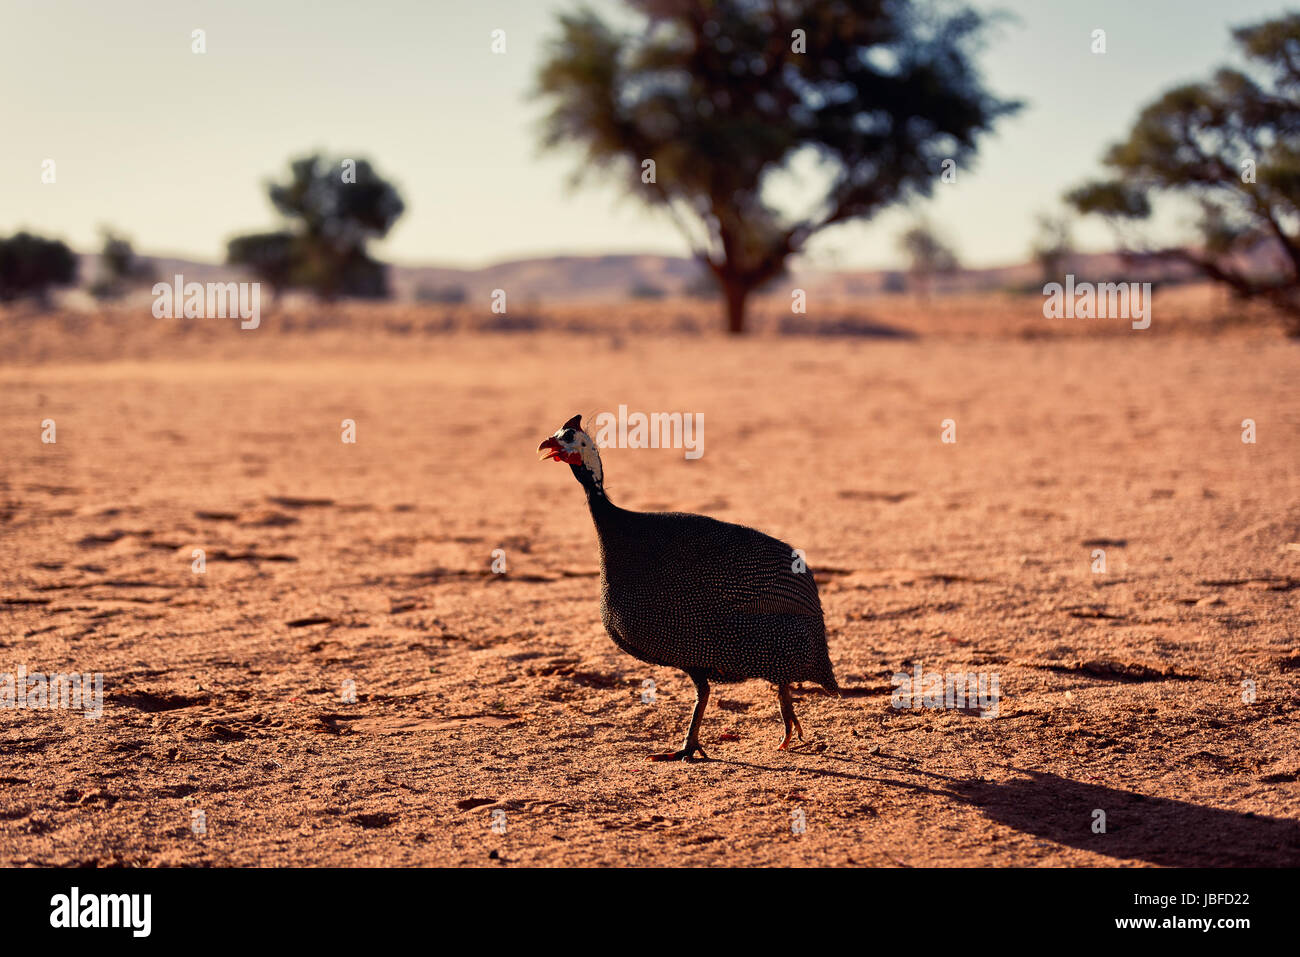 Namibian fowl search for food. Stock Photo